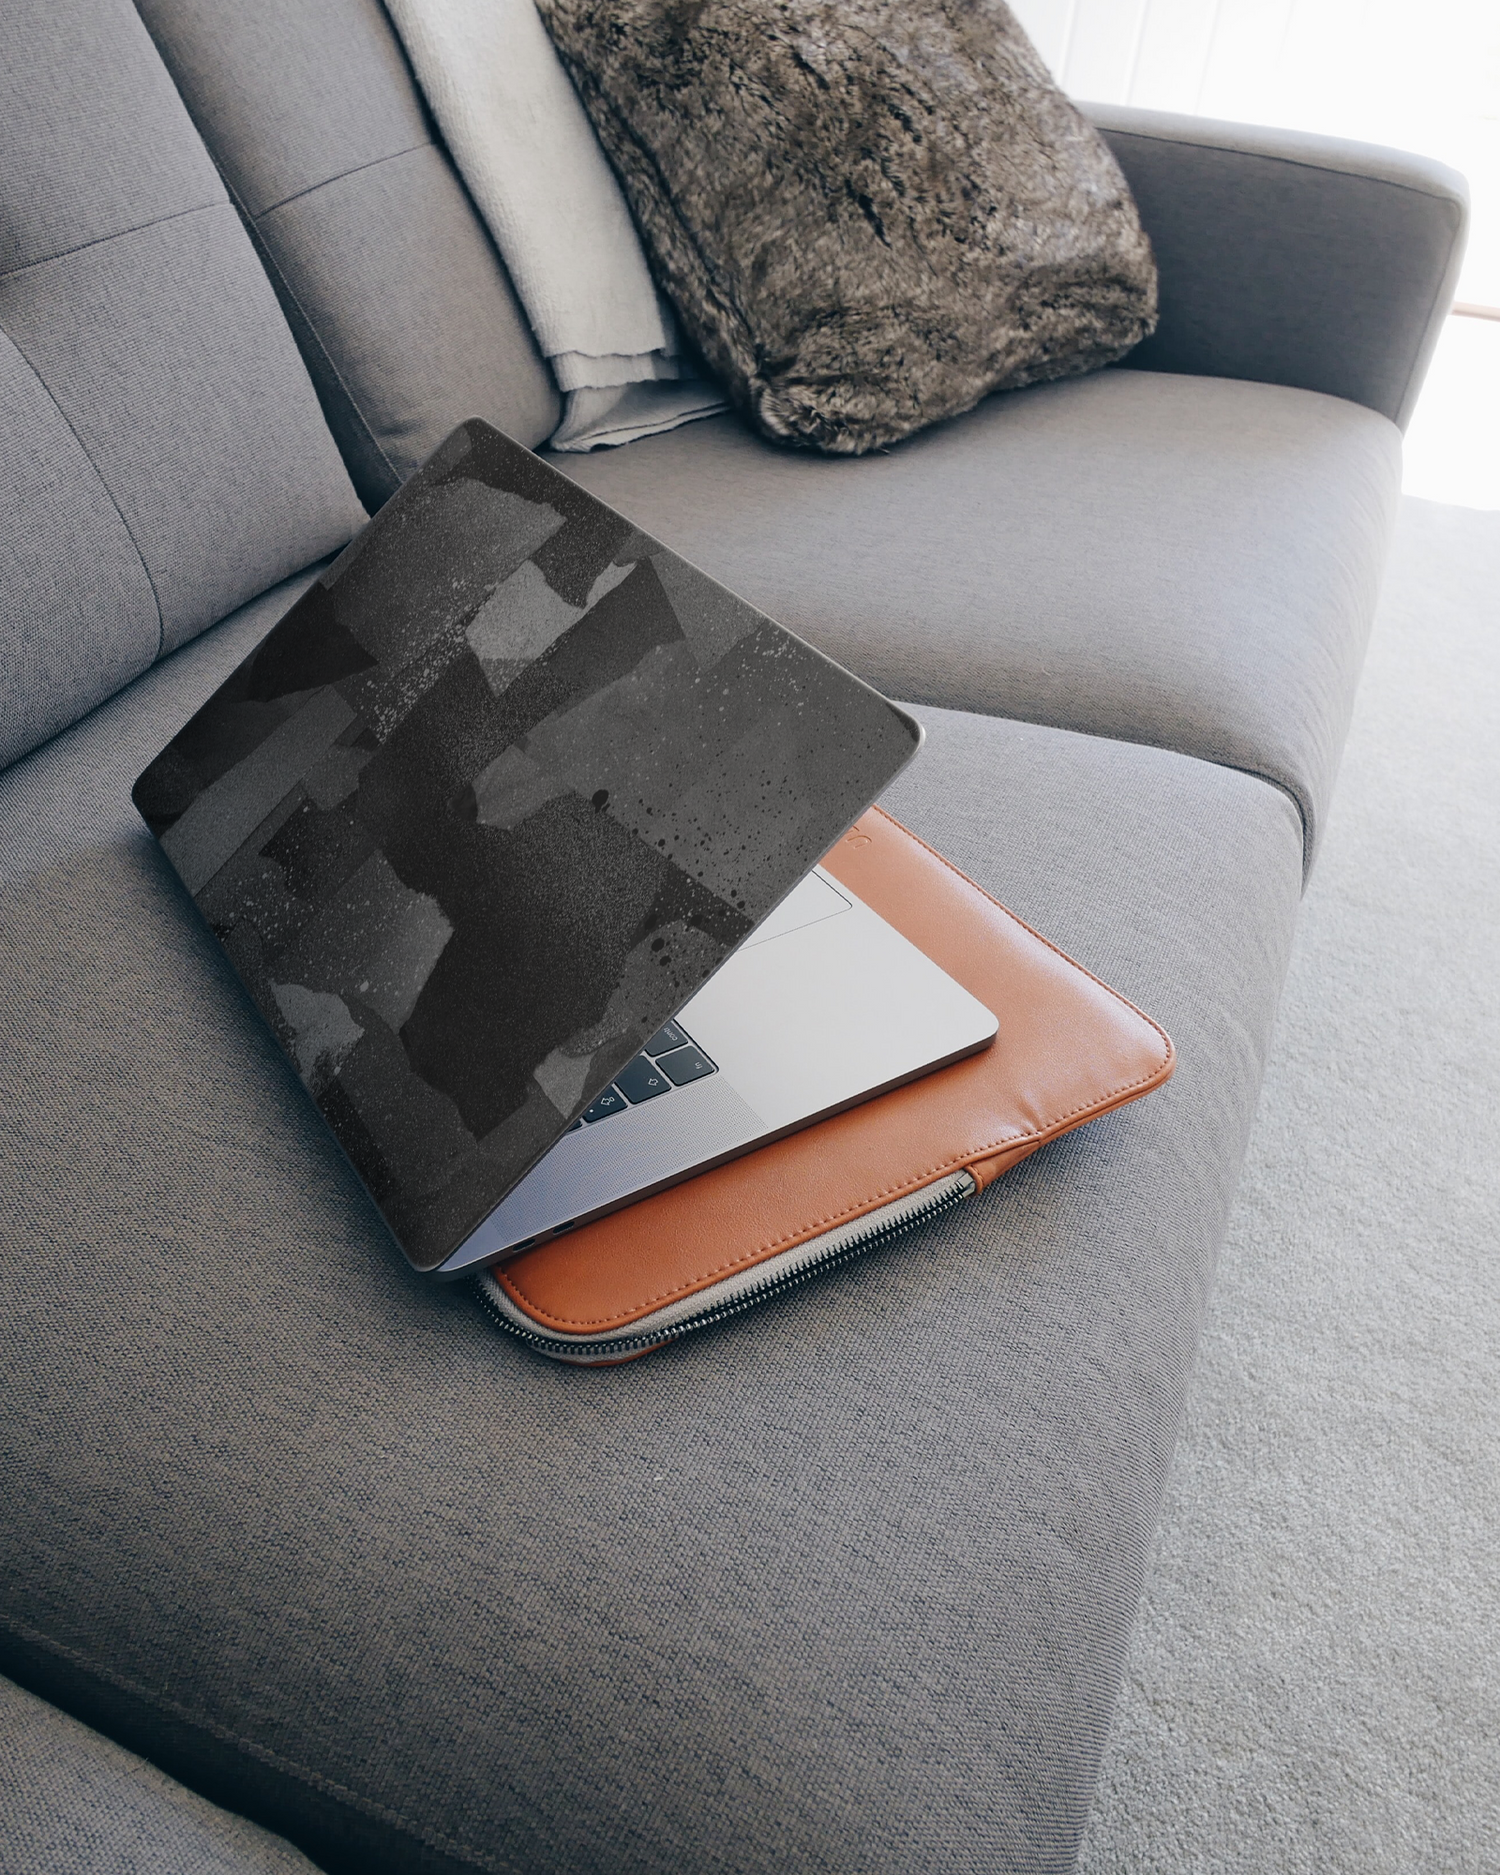 Torn Paper Collage Laptop Skin for 15 inch Apple MacBooks on a couch